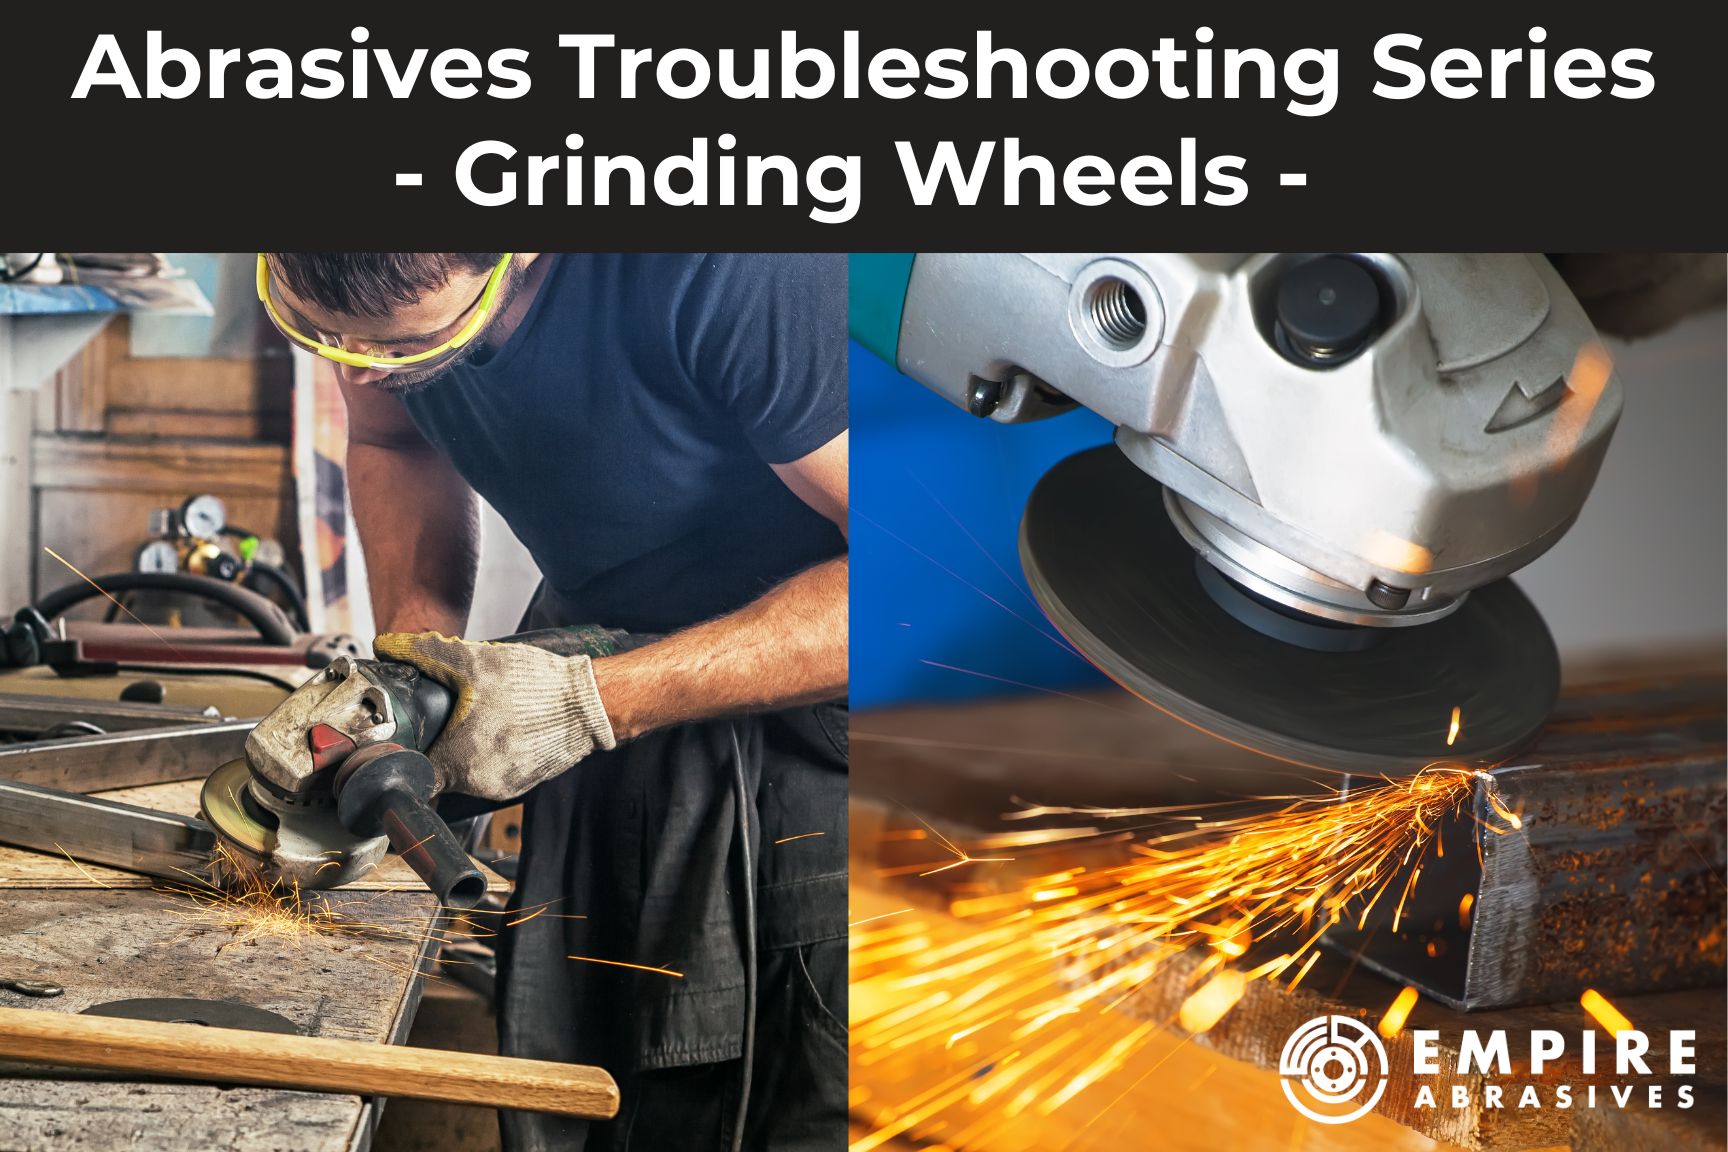 Troubleshooting Common Abrasive Tool Issues - Grinding Wheels for Angle Grinders